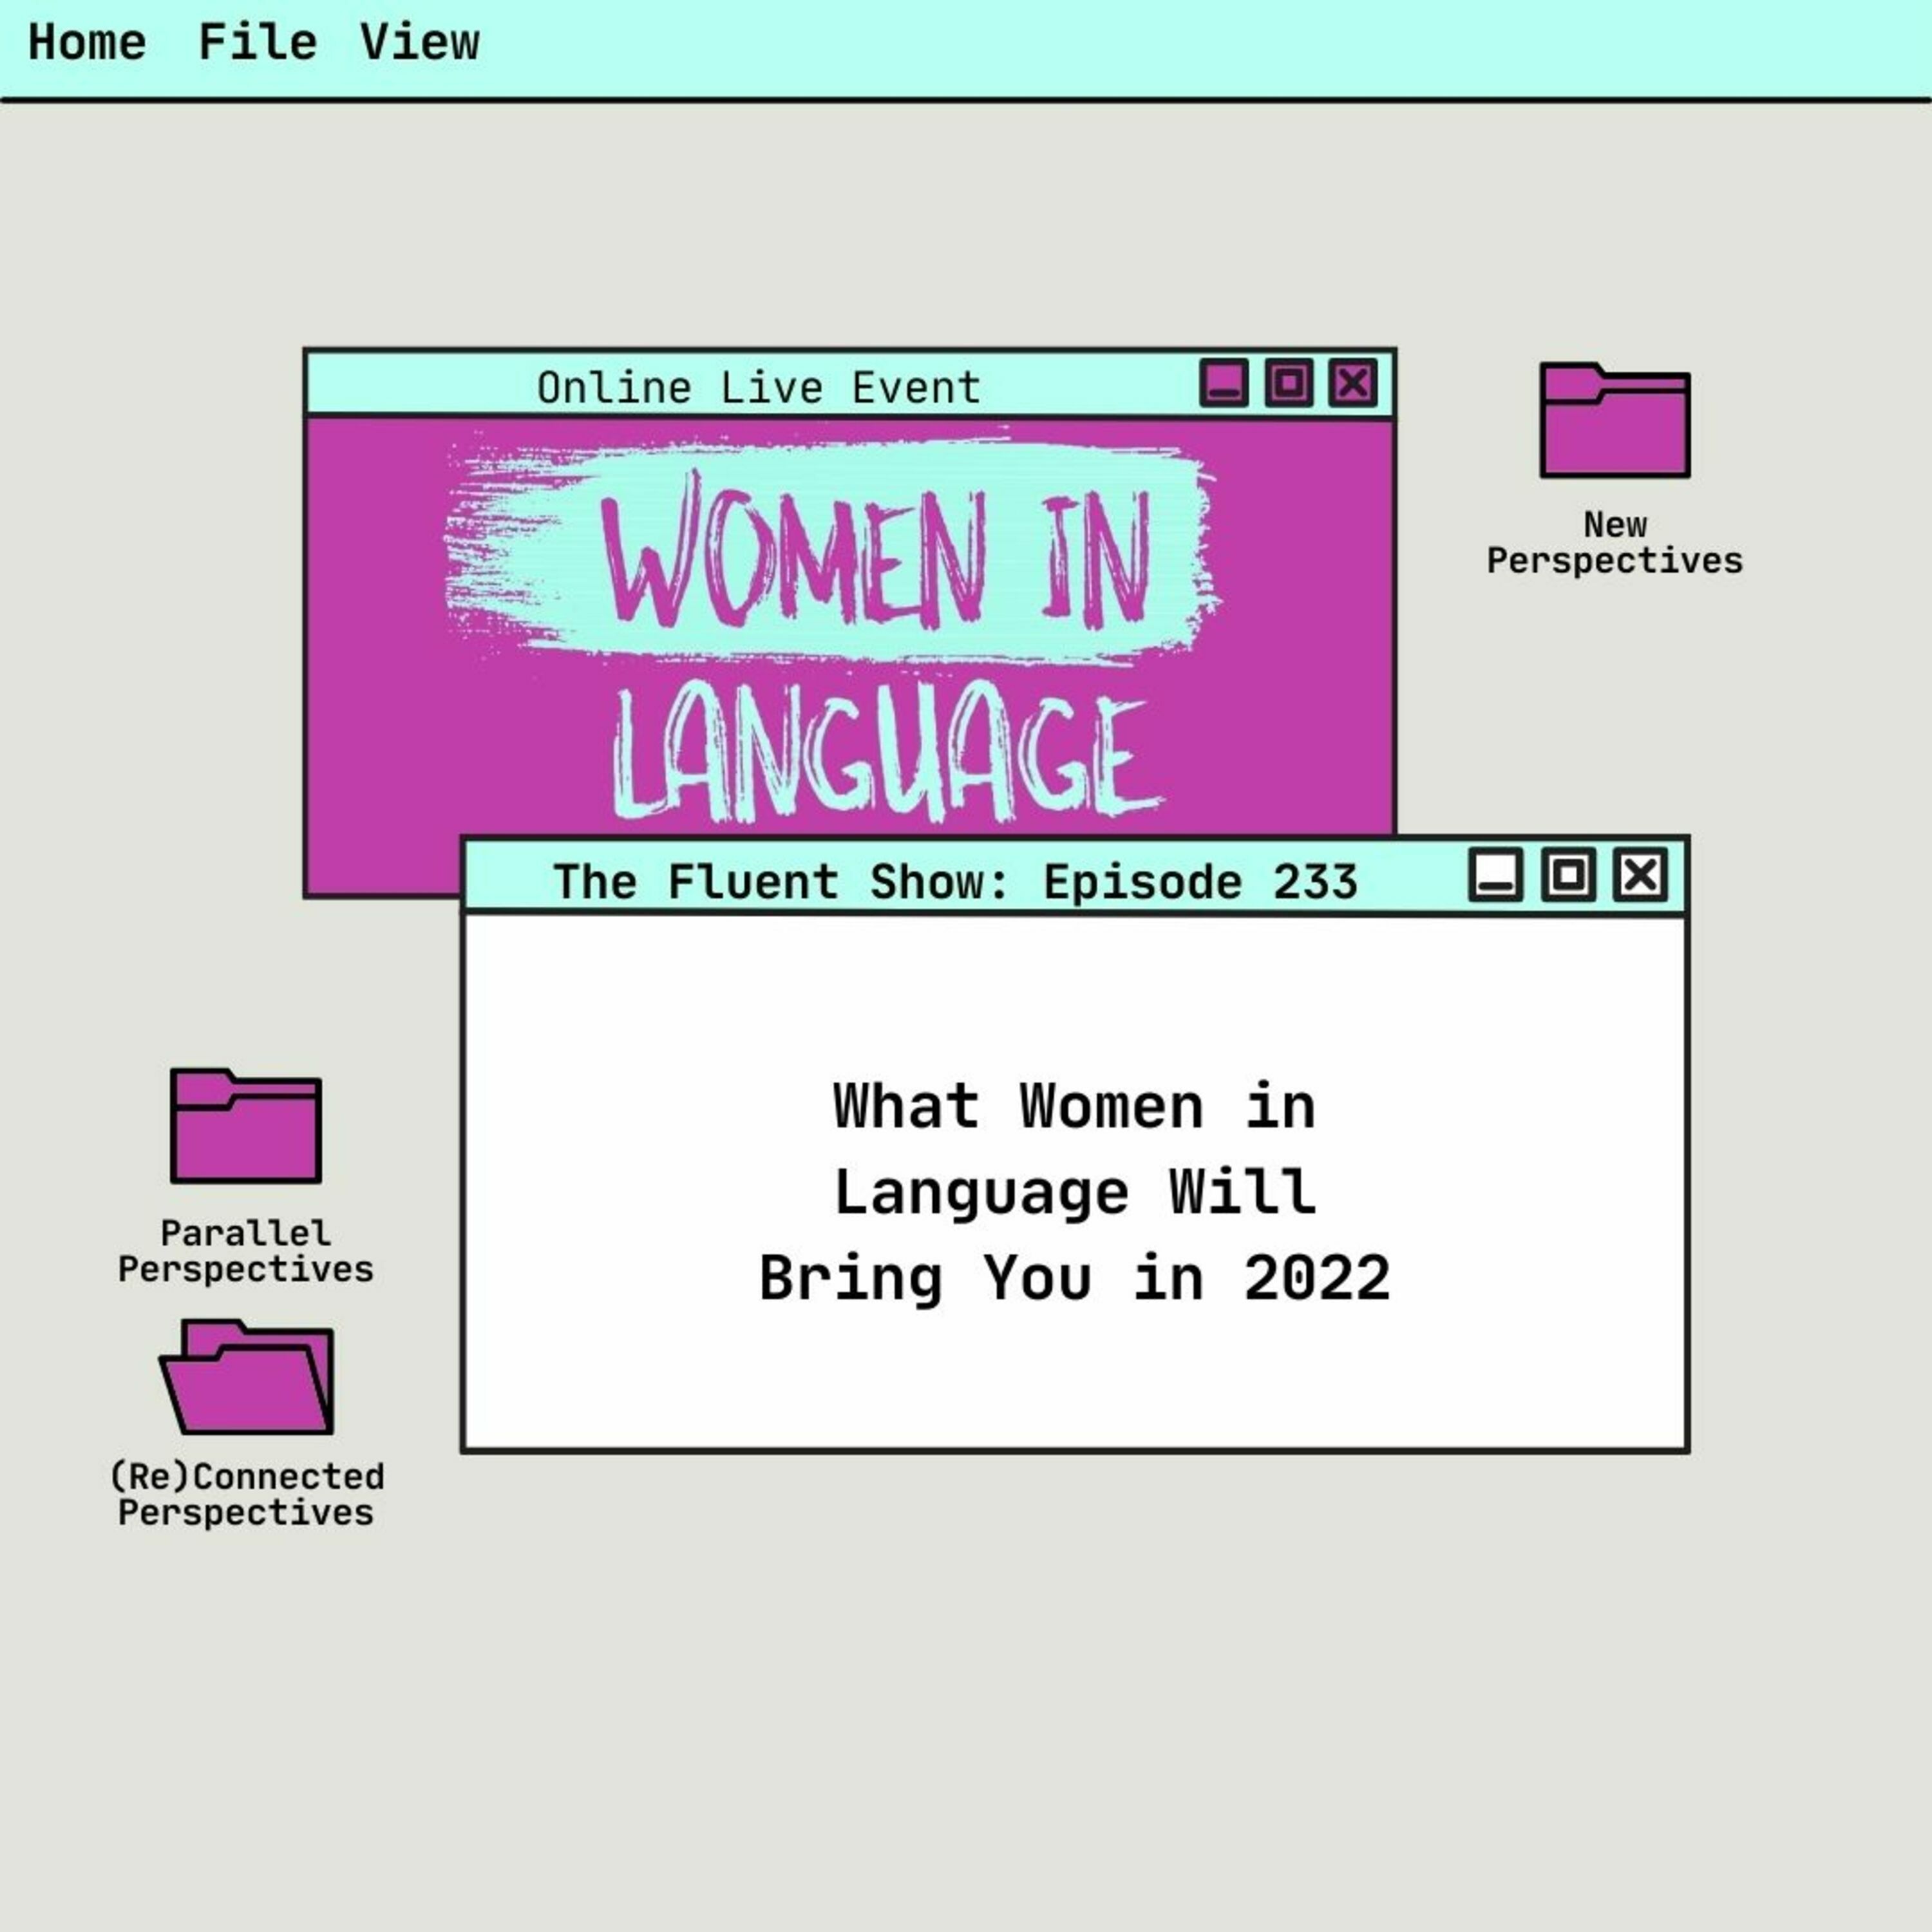 What Women in Language Will Bring You in 2022